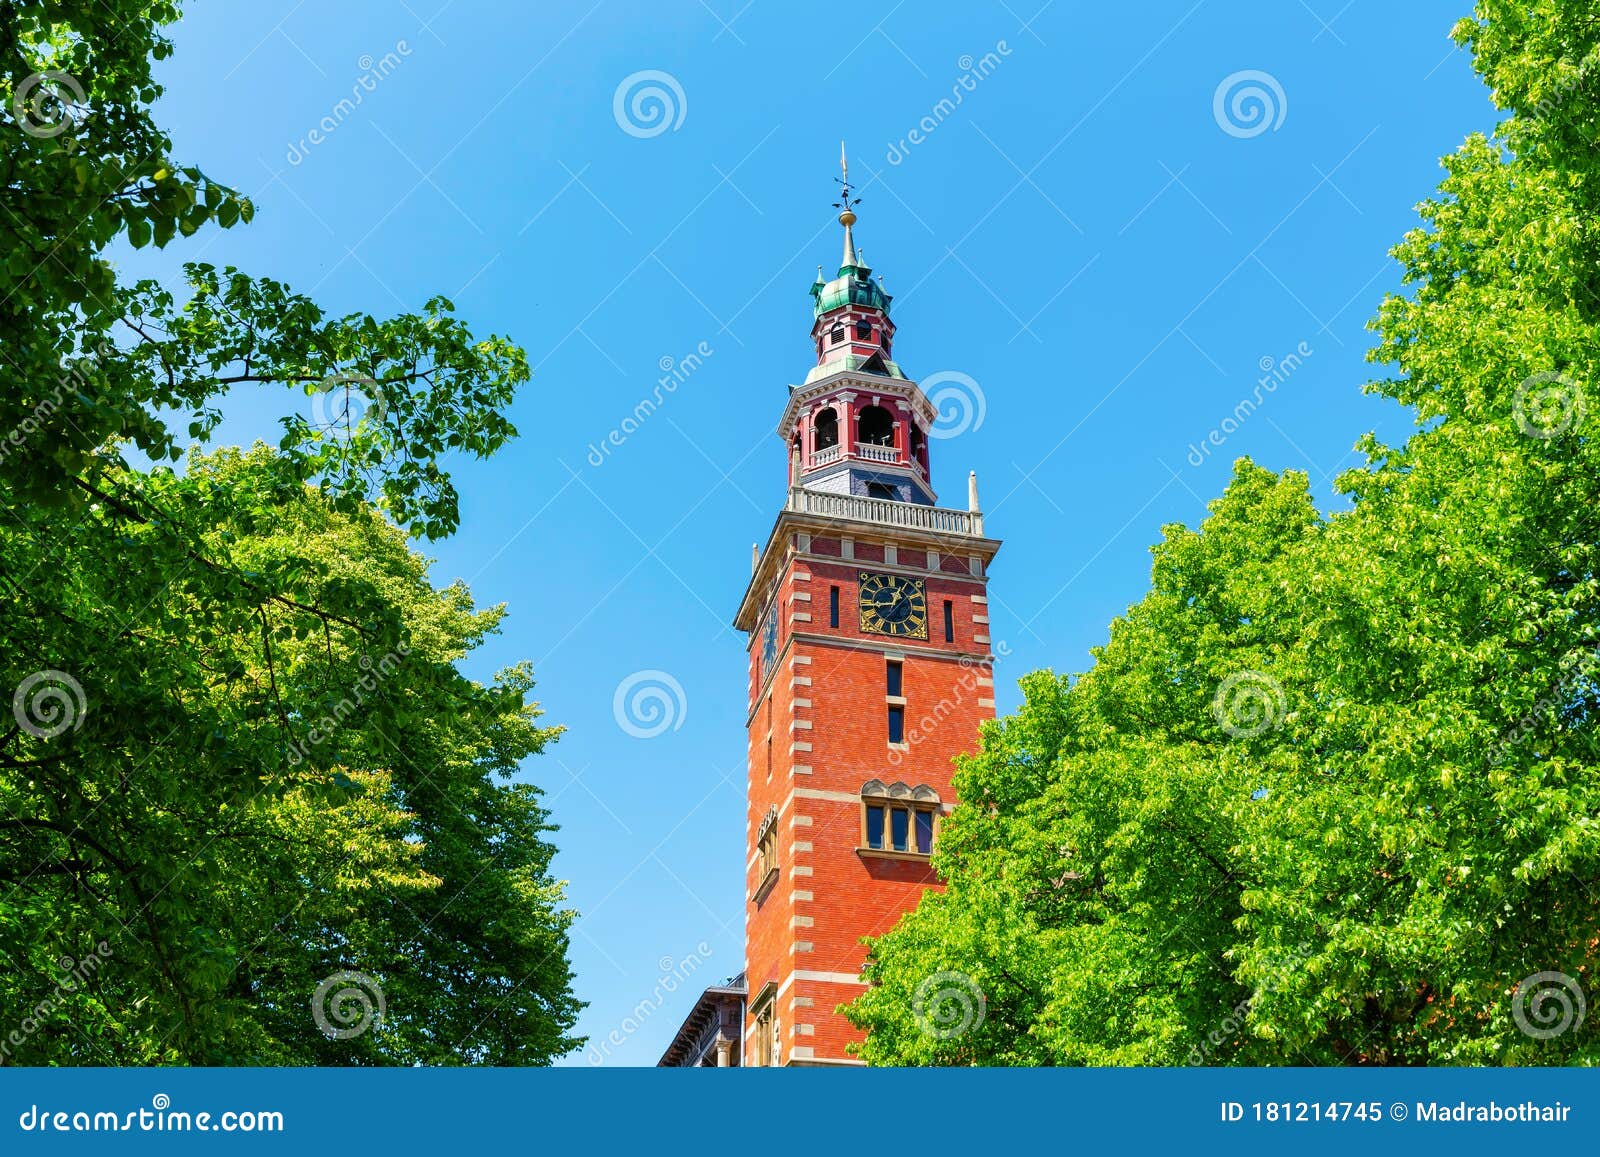 tower of the old town hall in leer, germany